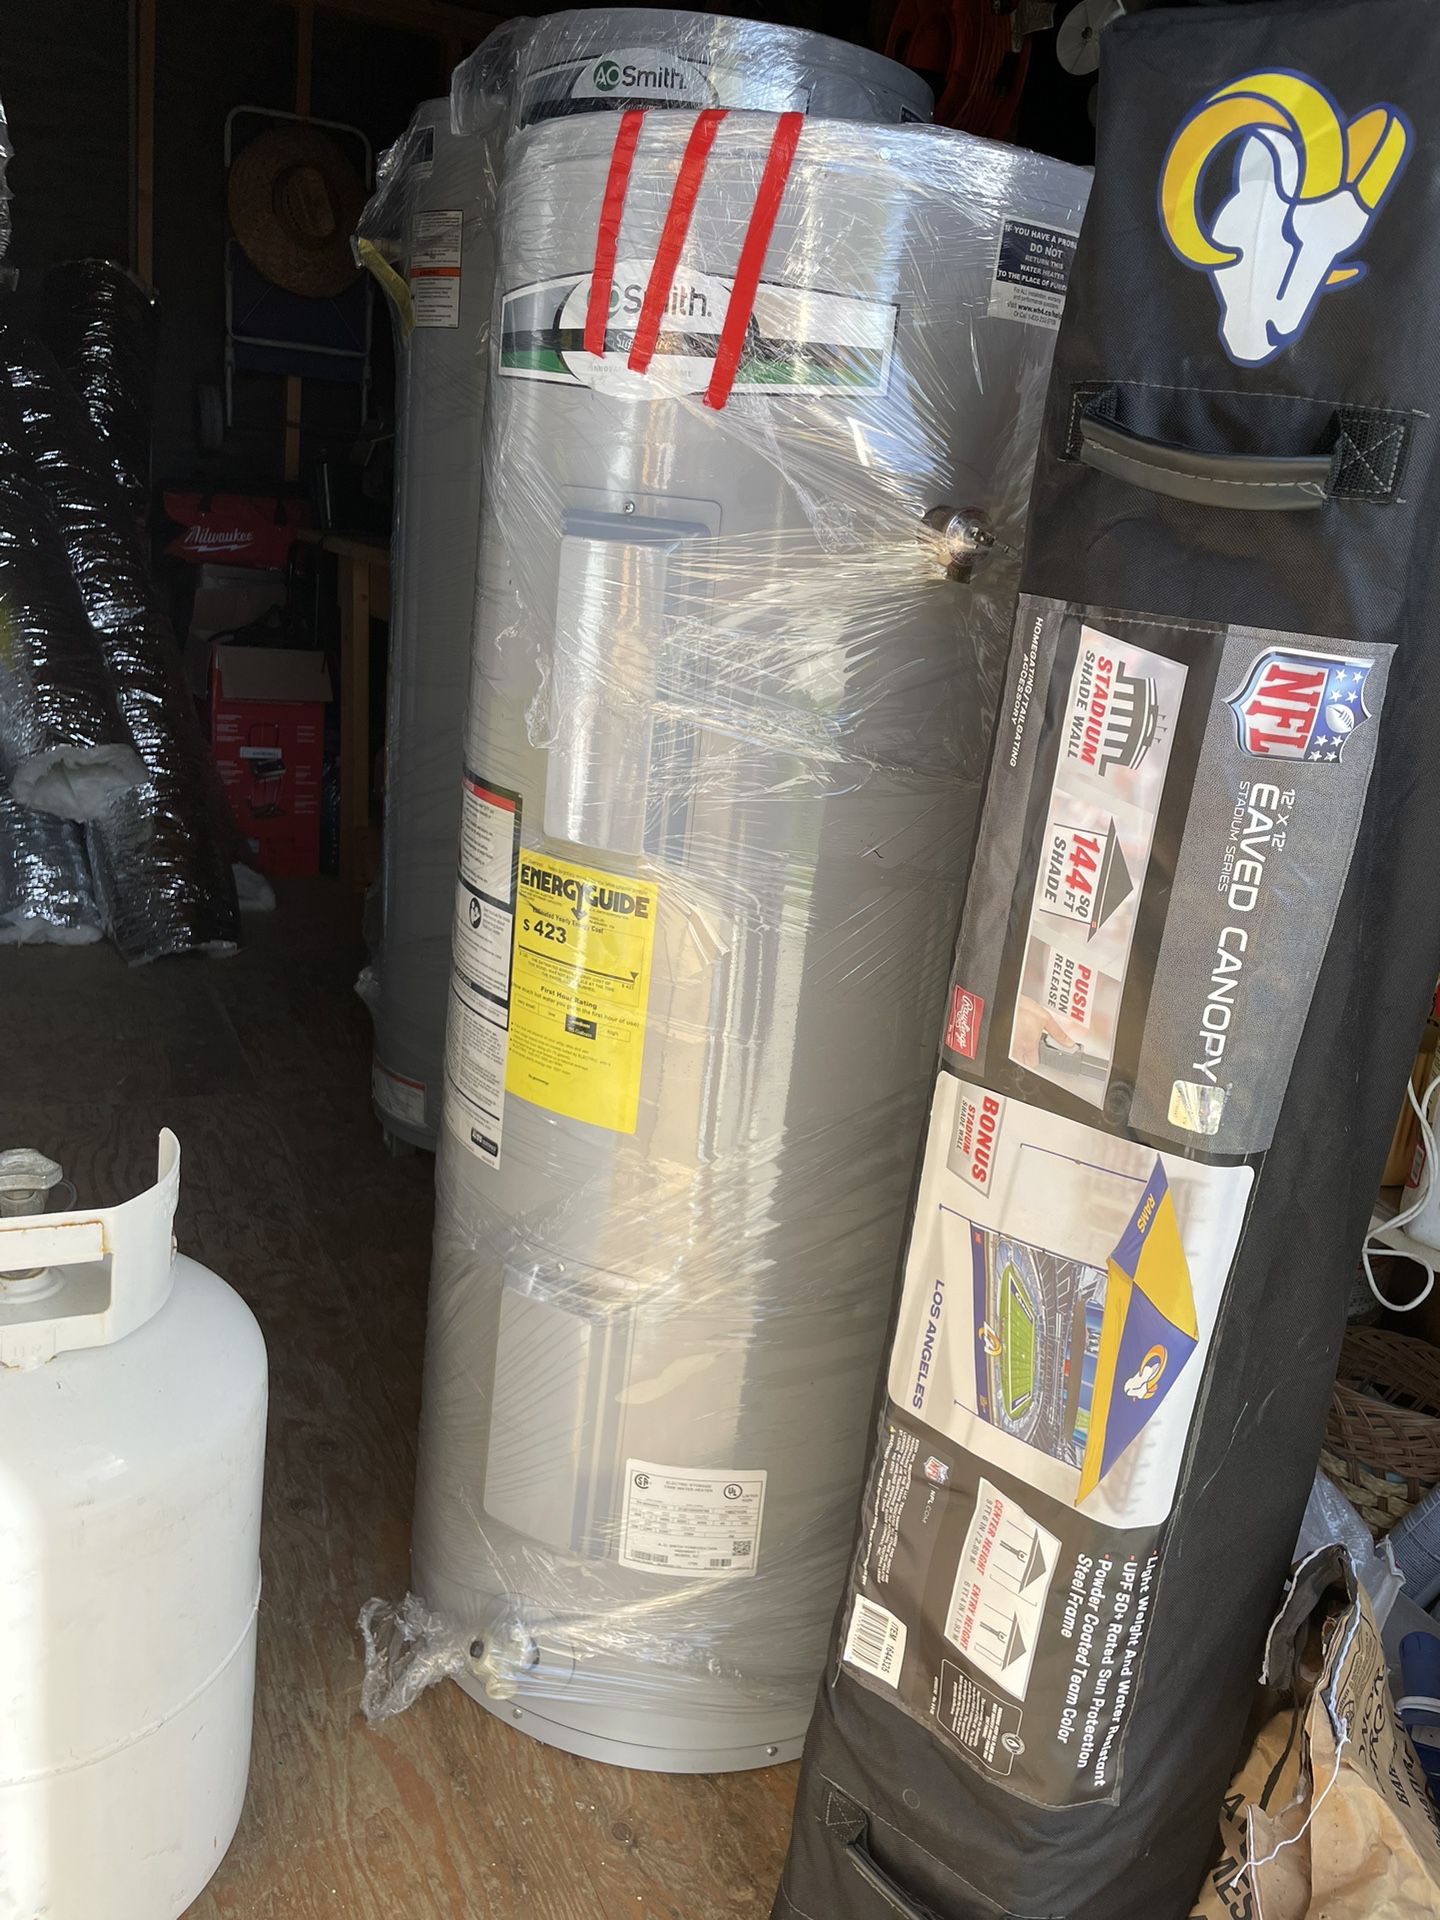 Mueller Austria Electric Kettle Water Heater with SpeedBoil Tech, for Sale  in Excelsior Springs, MO - OfferUp